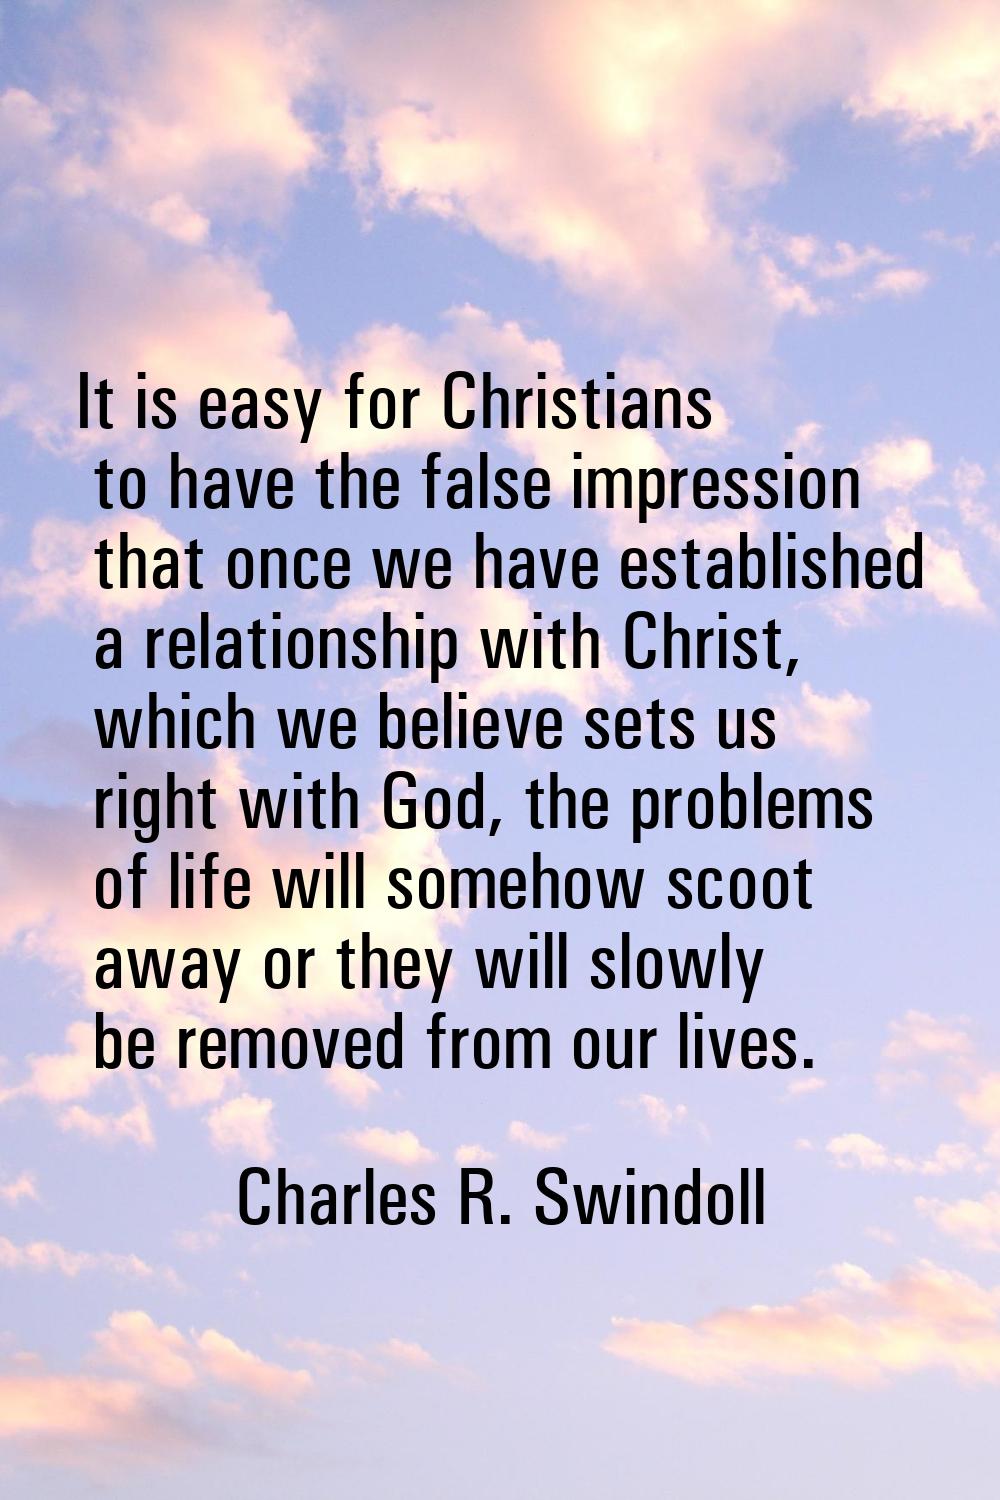 It is easy for Christians to have the false impression that once we have established a relationship